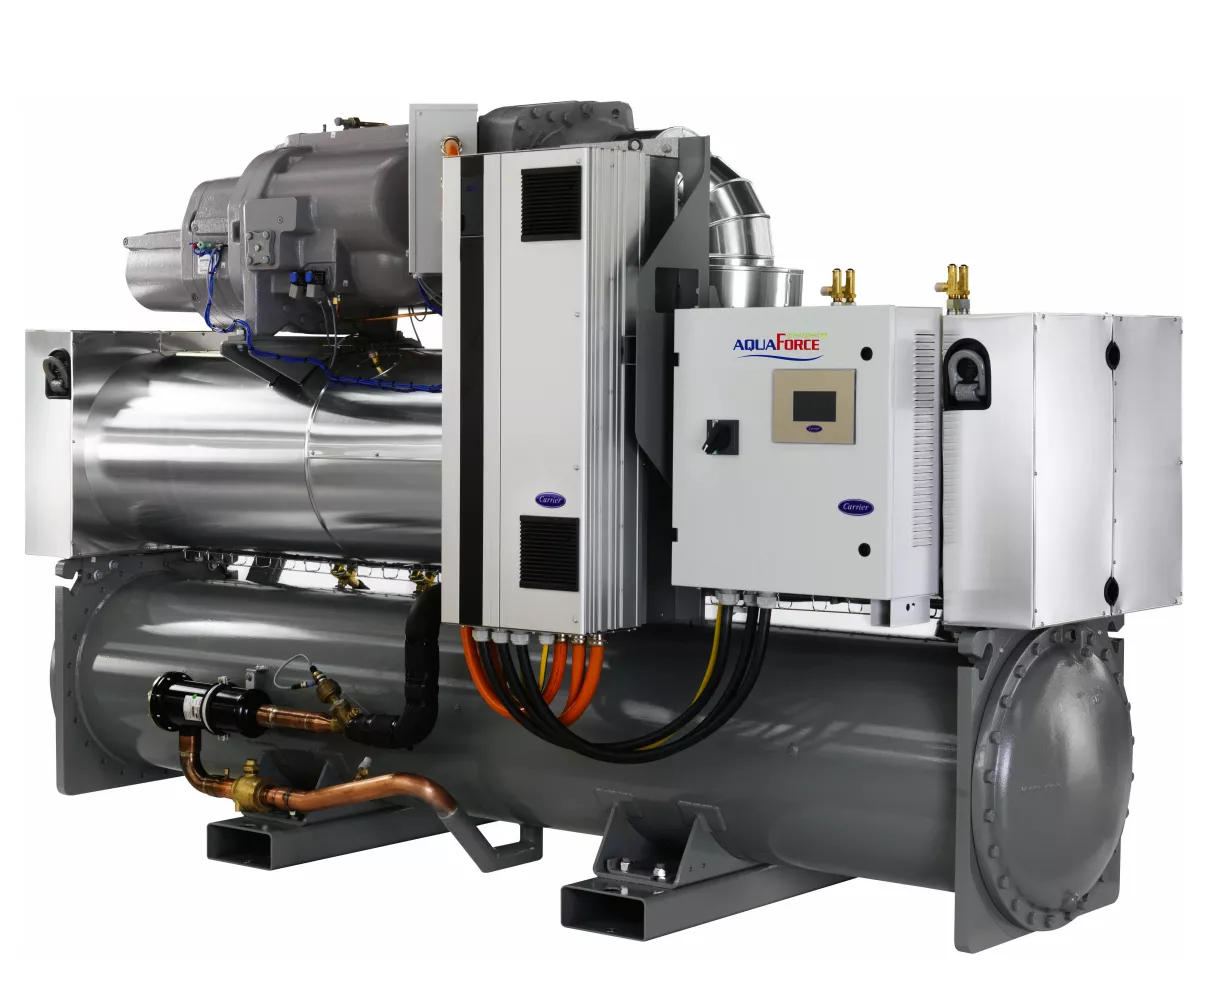 Carrier AquaForce Heat Pumps Deliver 8 Megawatts of Renewable Heating to Improve Farm Yields